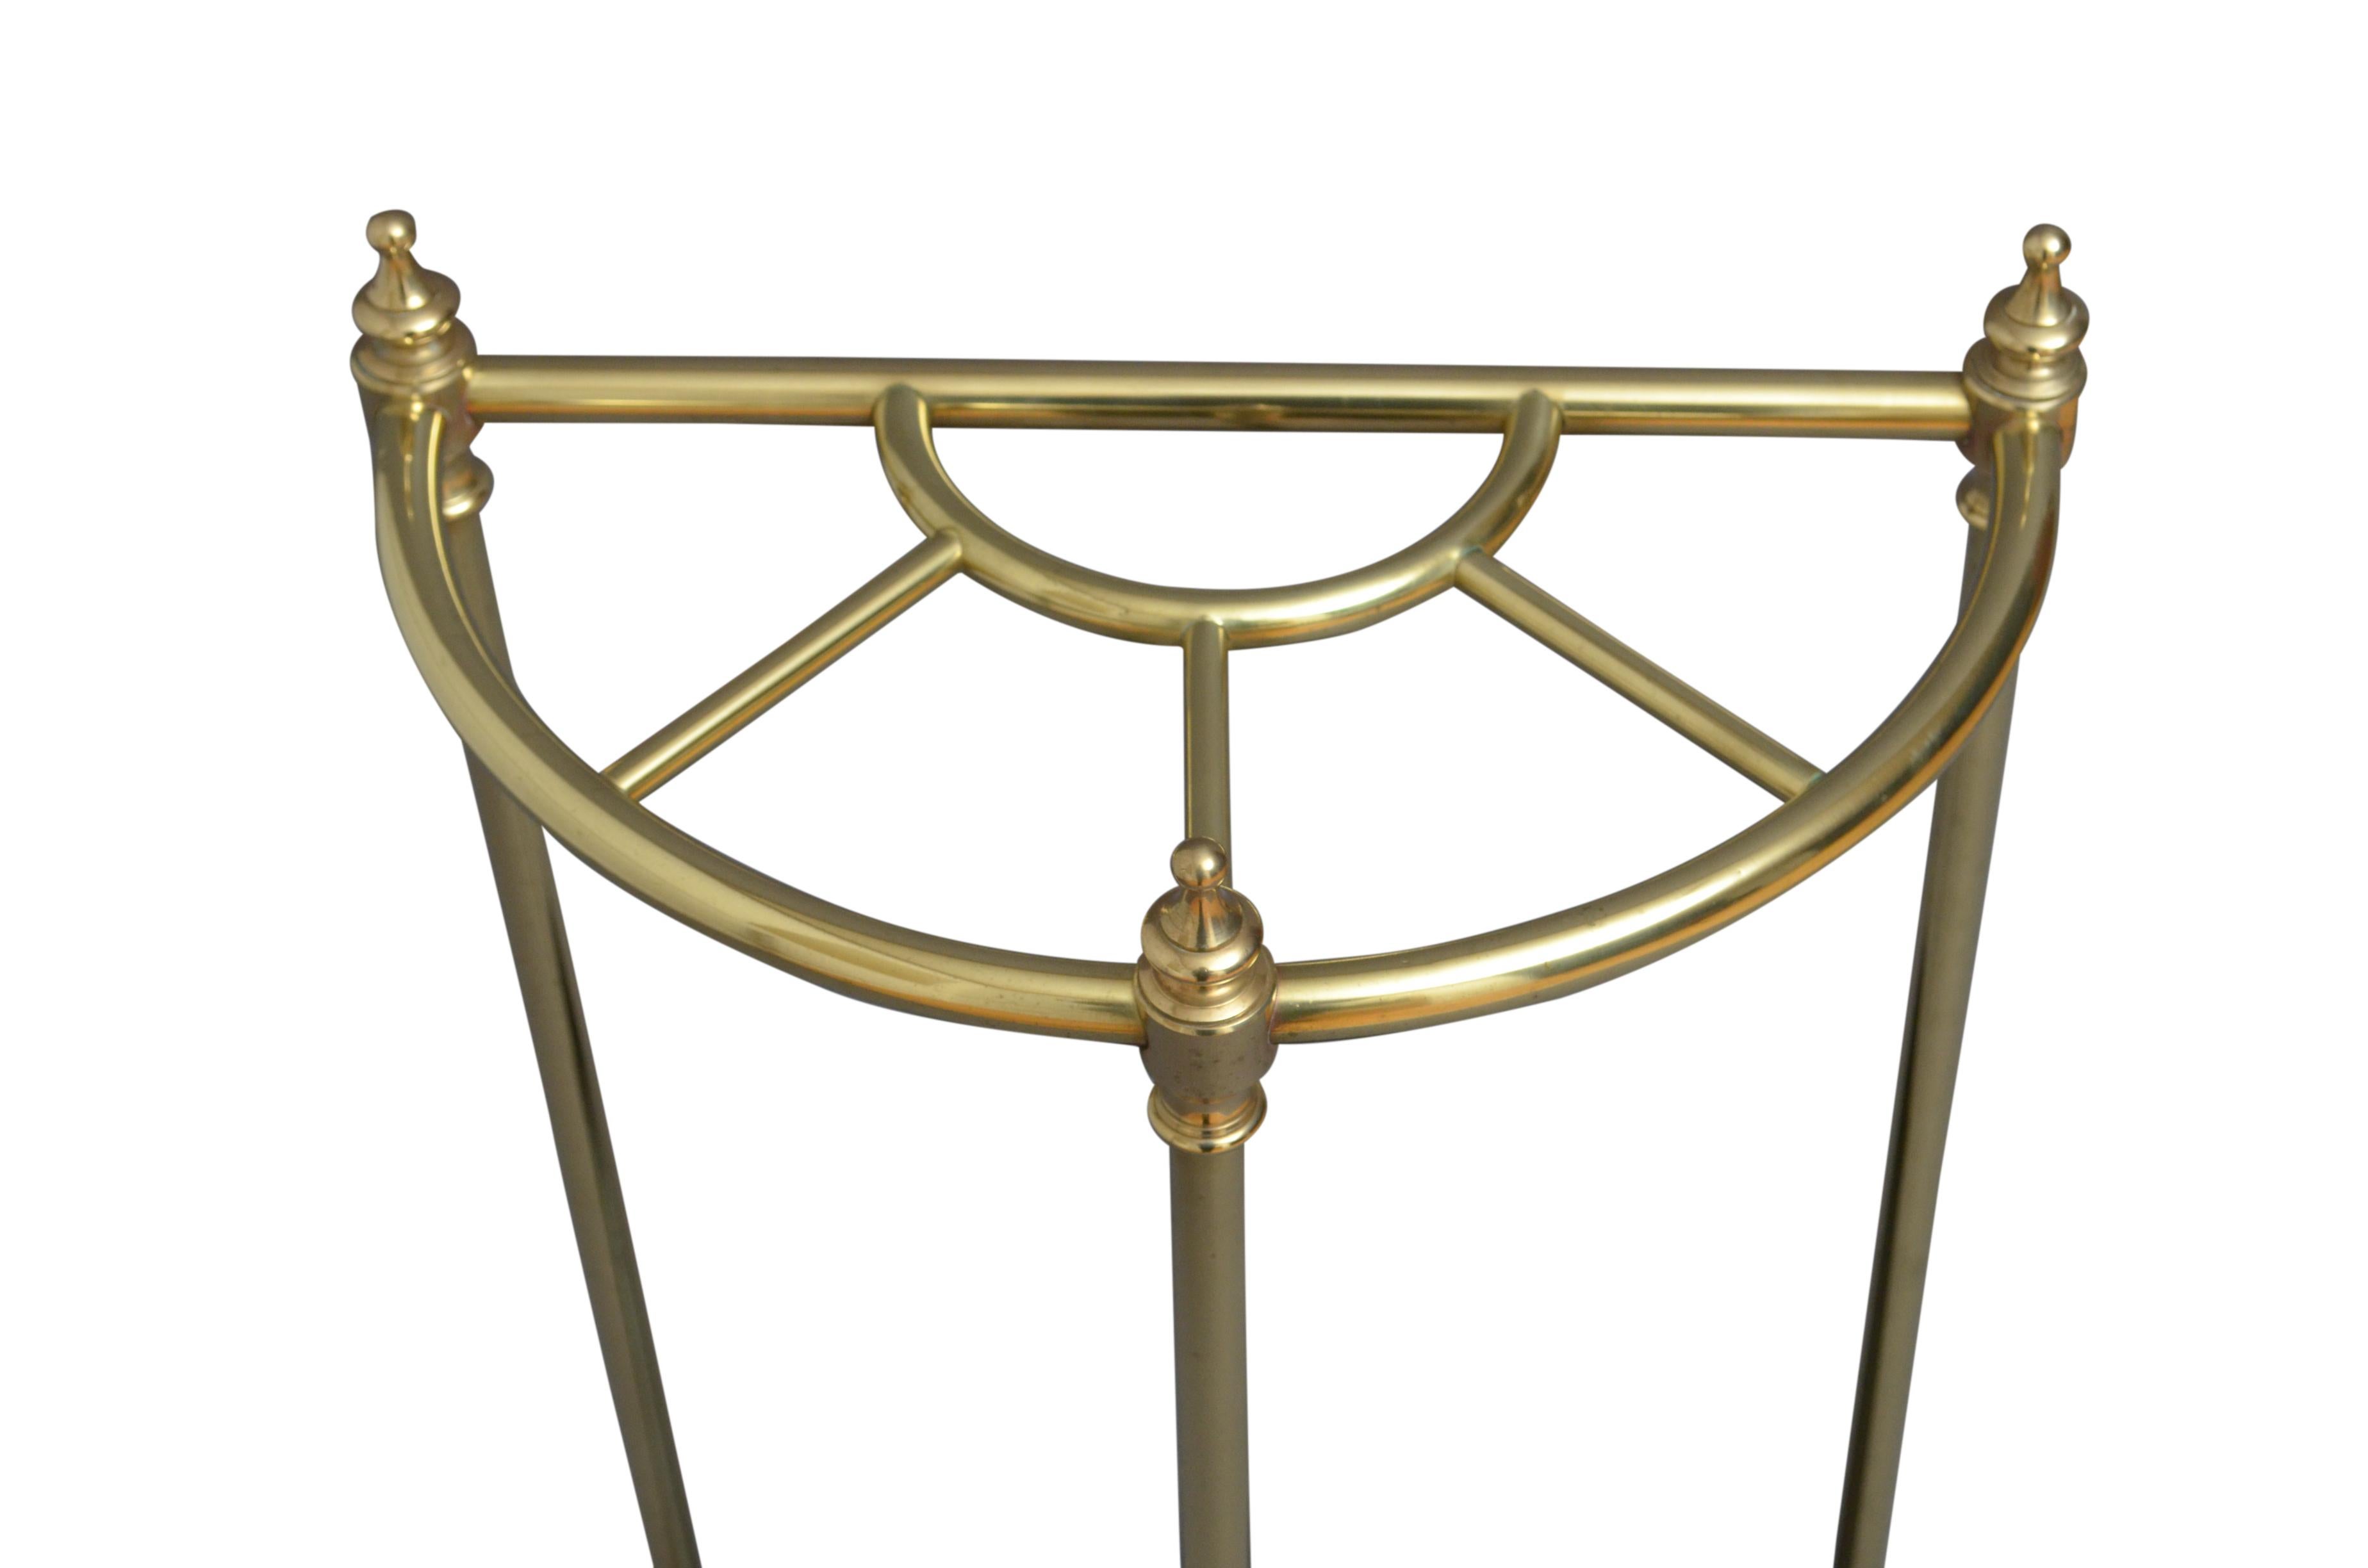 A Victorian brass demilune umbrella stand / stick stand, having 5 sections for umbrellas and walking sticks with finials and a drip tray. This antique umbrella stand has been cleaned and polished and is ready to use at home, circa 1890.
Measures: H